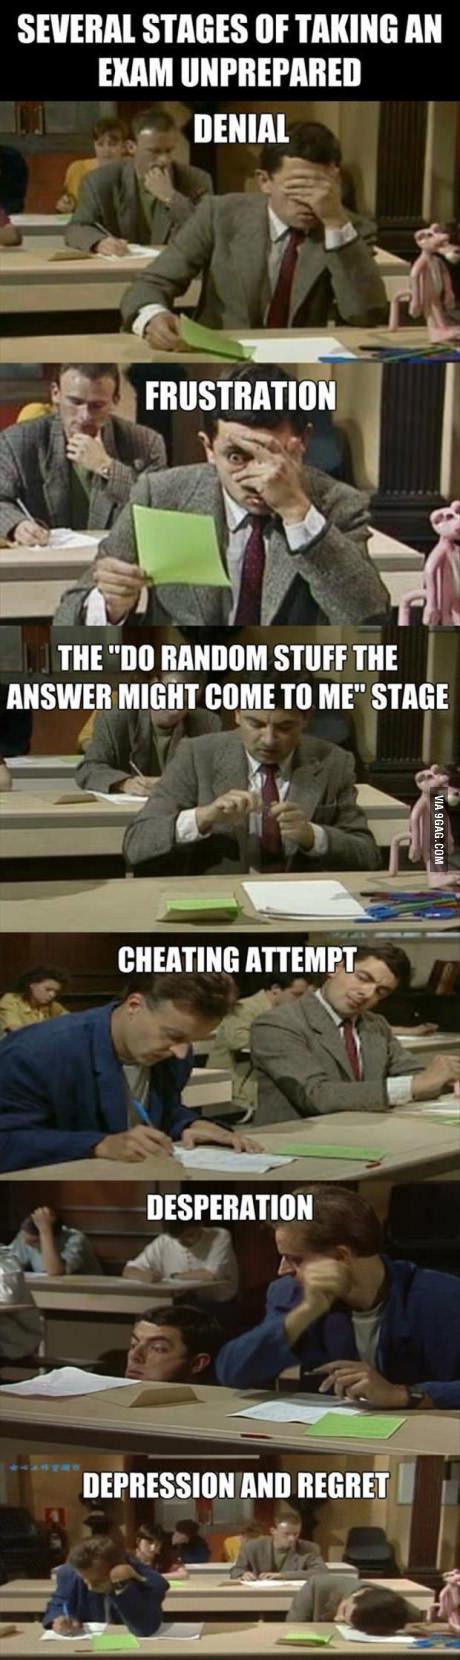 mr bean exam - Several Stages Of Taking An Exam Unprepared Denial Frustration Frustration The "Do Random Stuff The Answer Might Come To Me" Stage Via 9GAG.Com Cheating Attempt Desperation Depression And Regret